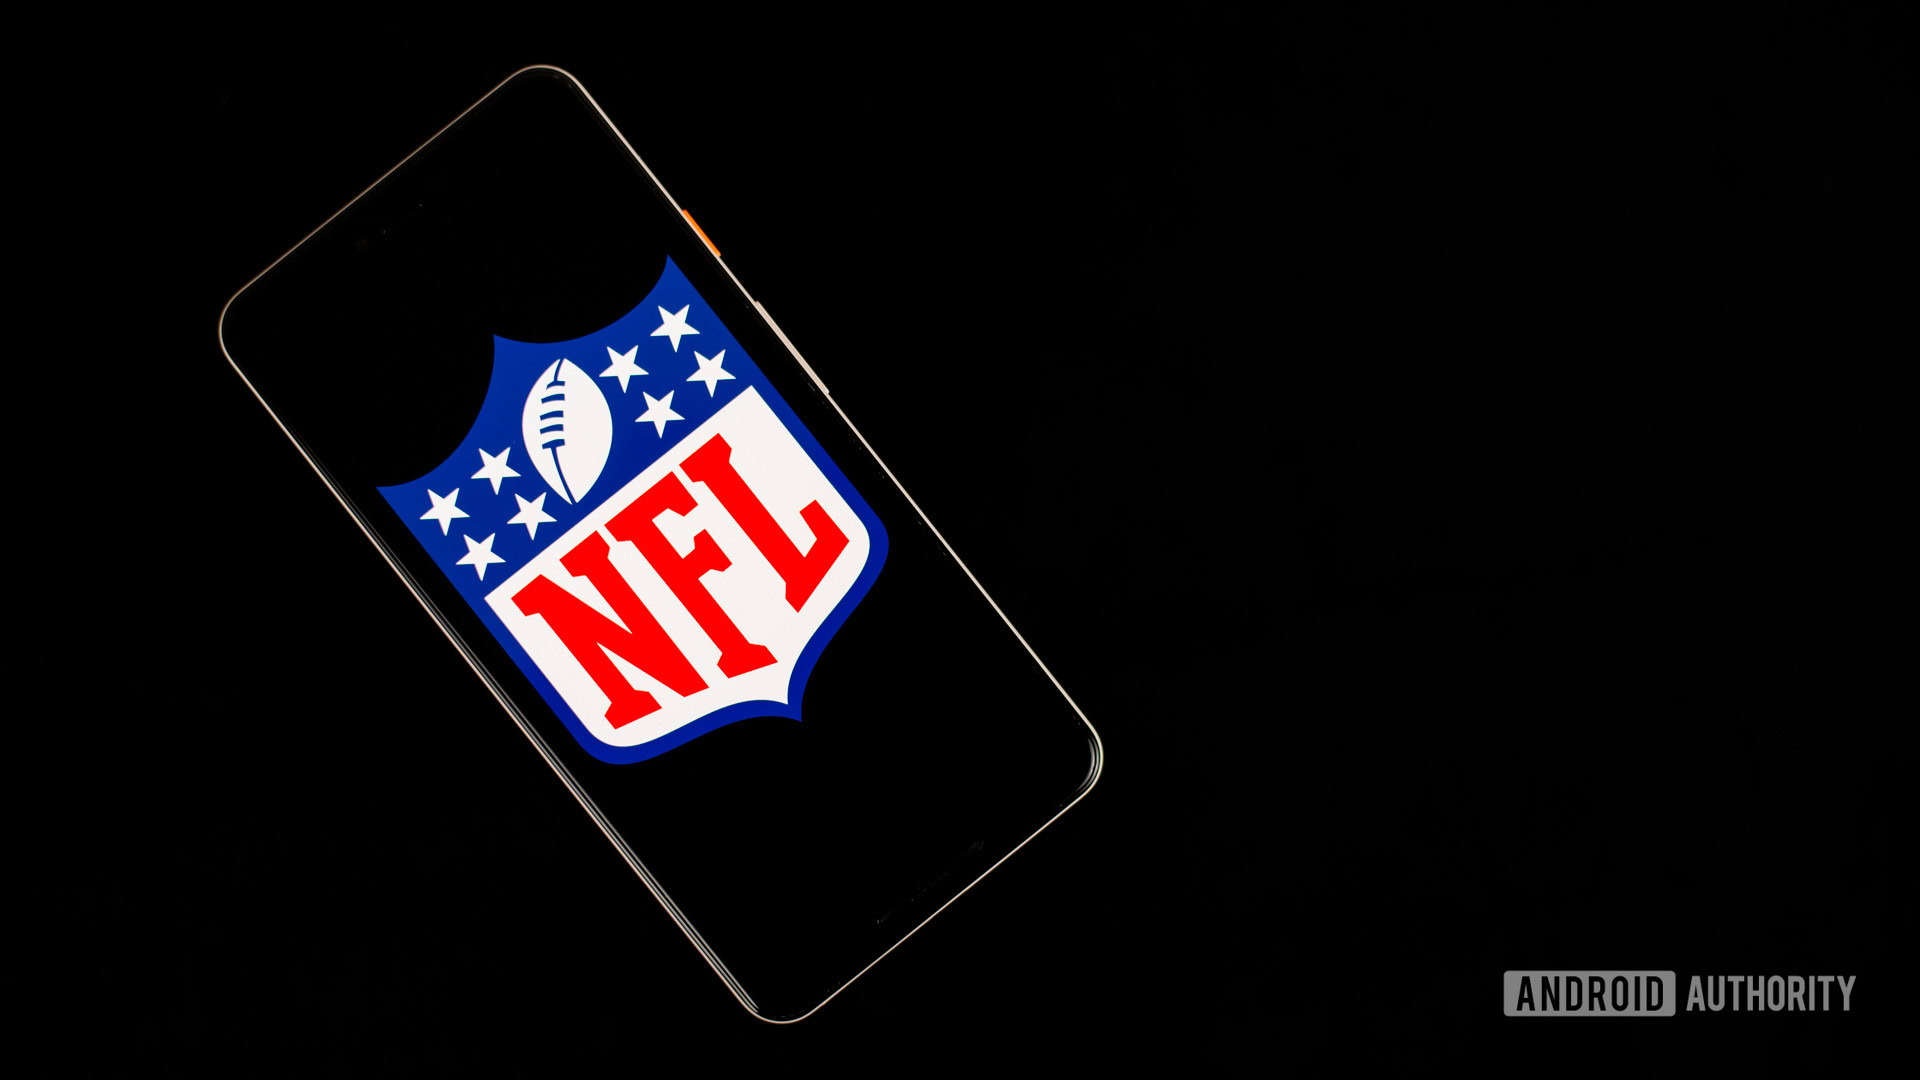 beats Apple to win the rights to NFL Sunday Ticket